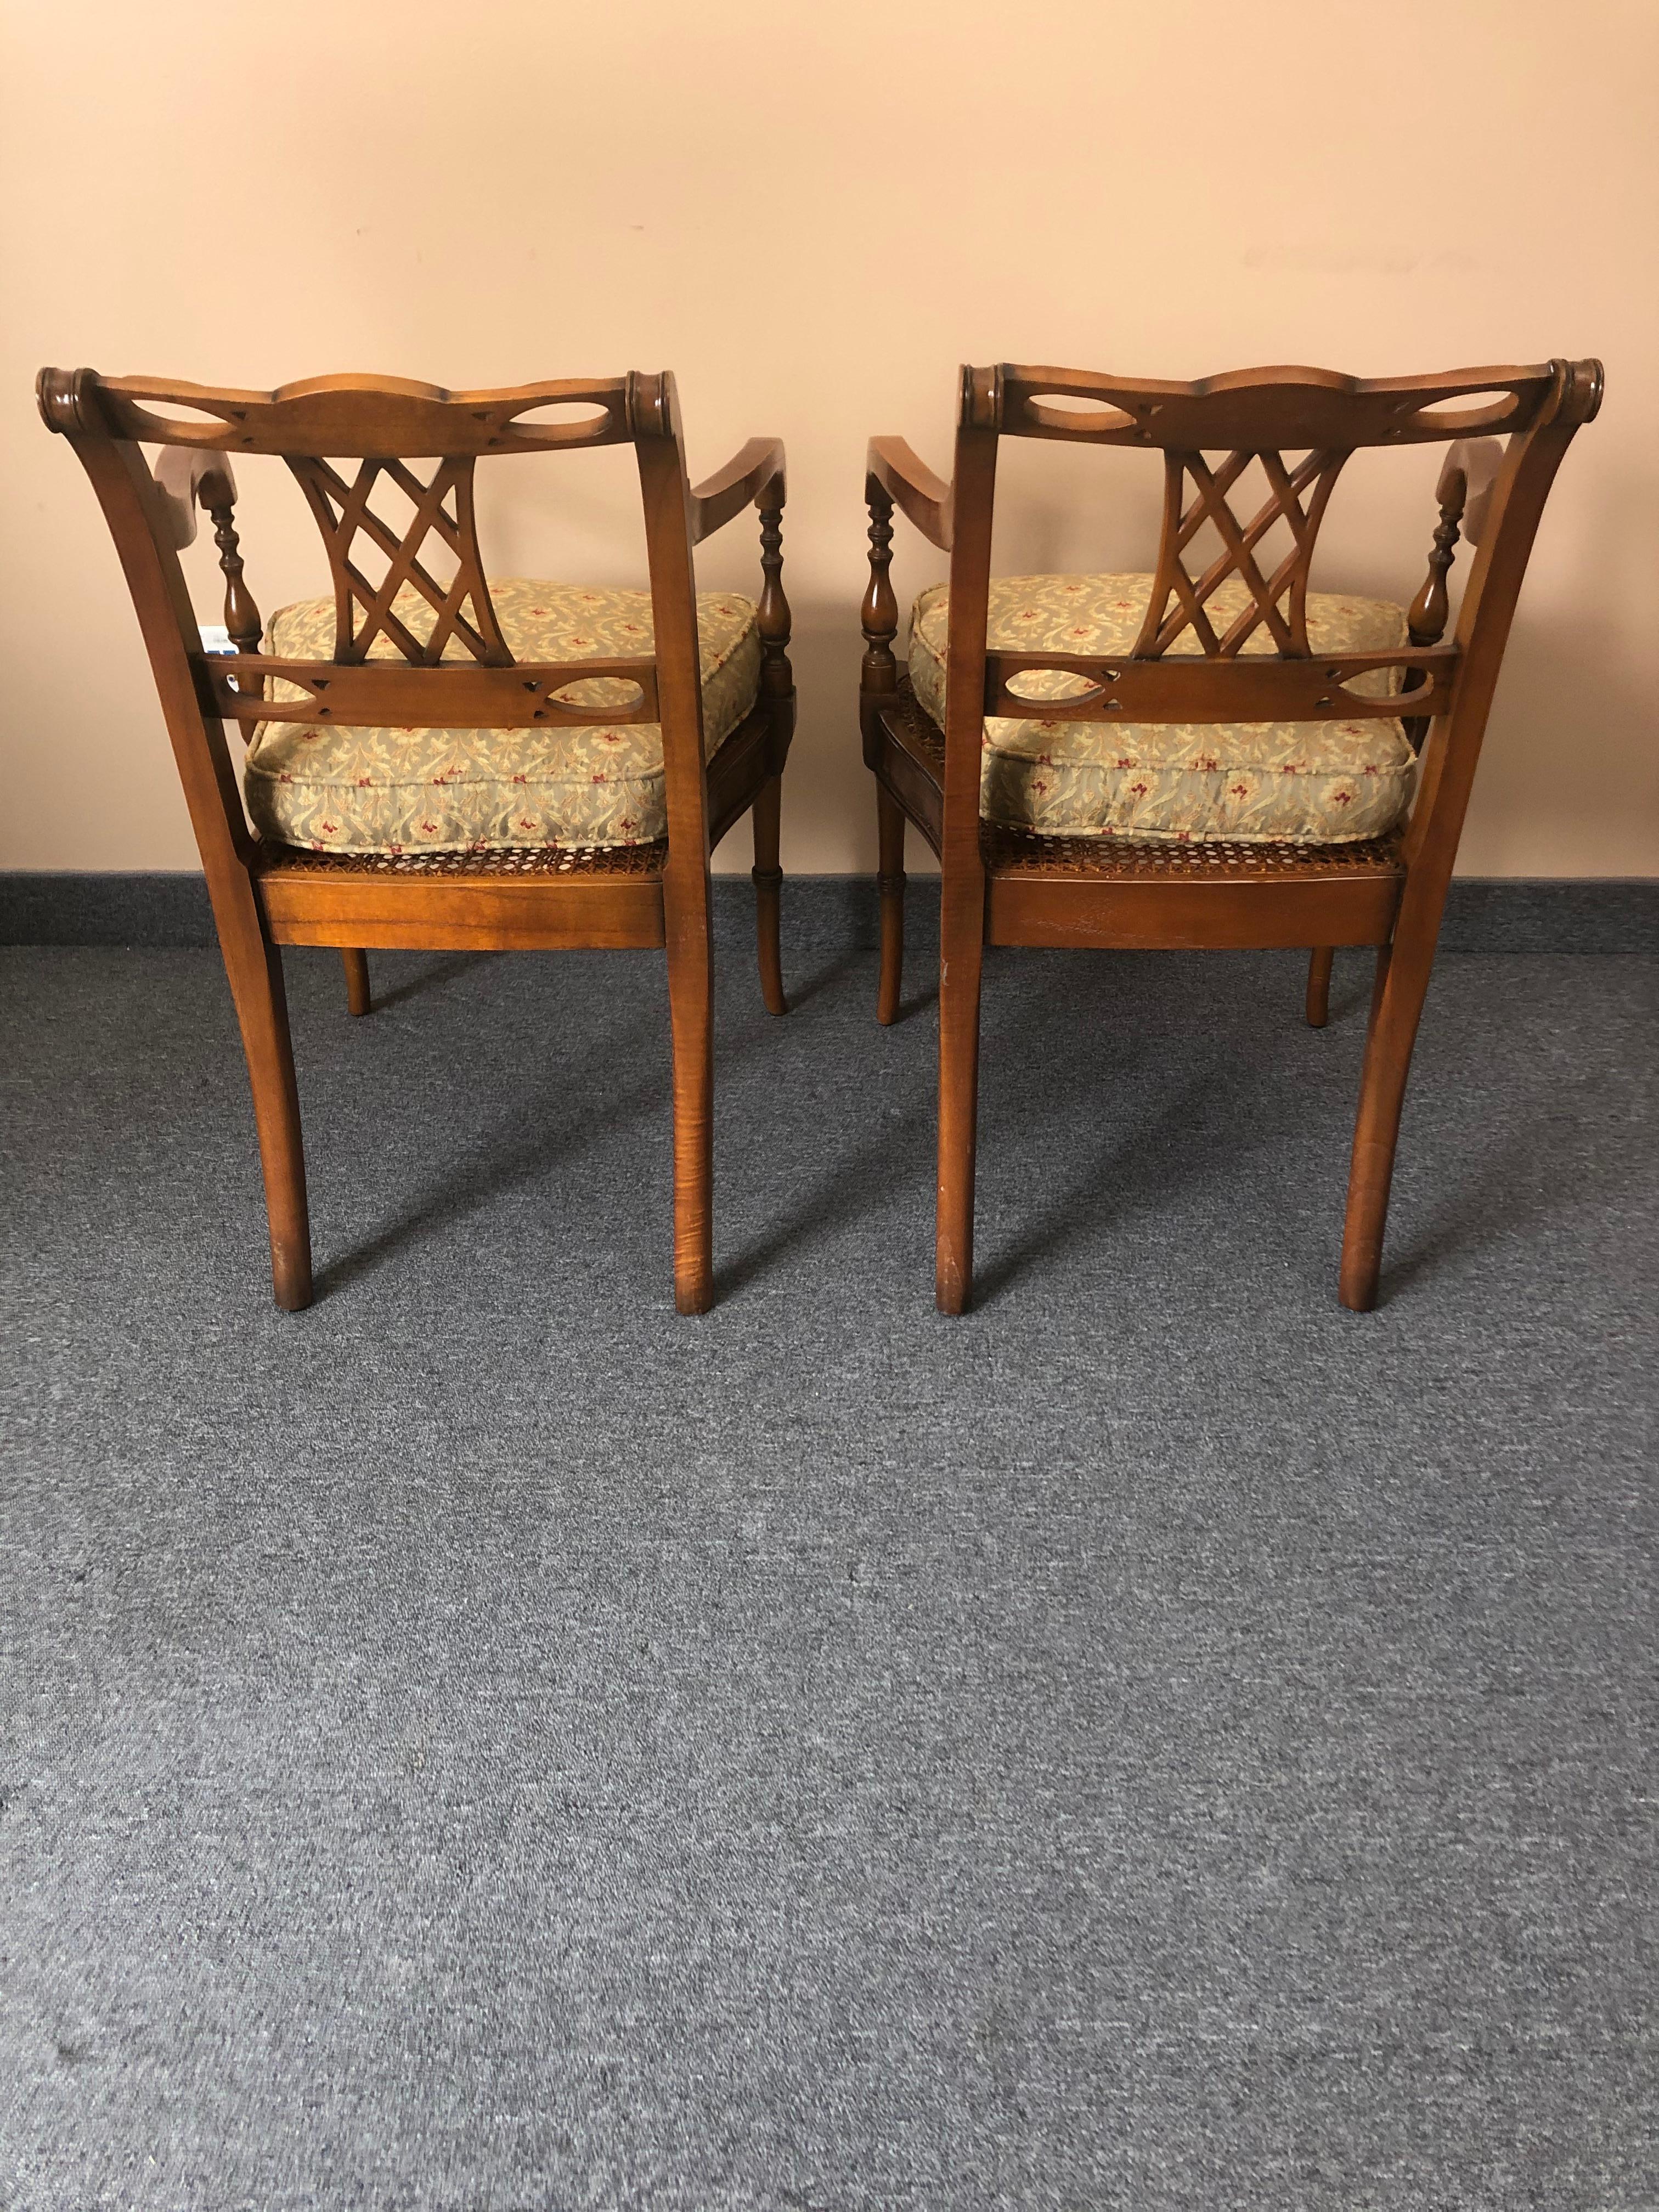 Philippine Refined Pair of Maitland Smith Mahogany Armchairs with Caned Seats  For Sale